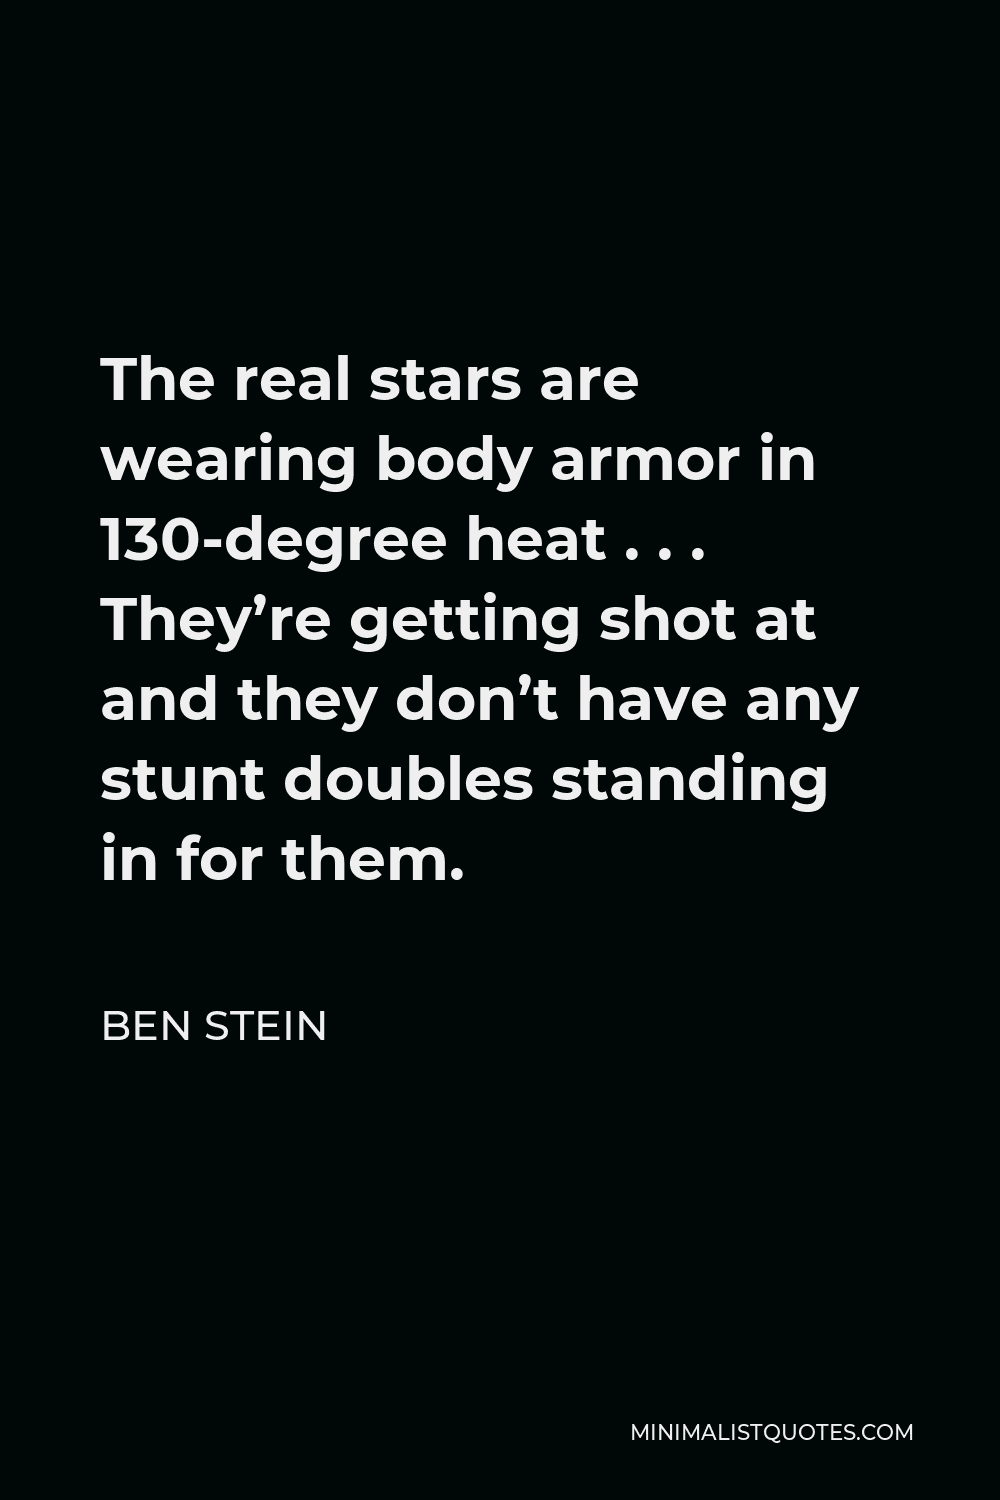 Ben Stein Quote - The real stars are wearing body armor in 130-degree heat . . . They’re getting shot at and they don’t have any stunt doubles standing in for them.